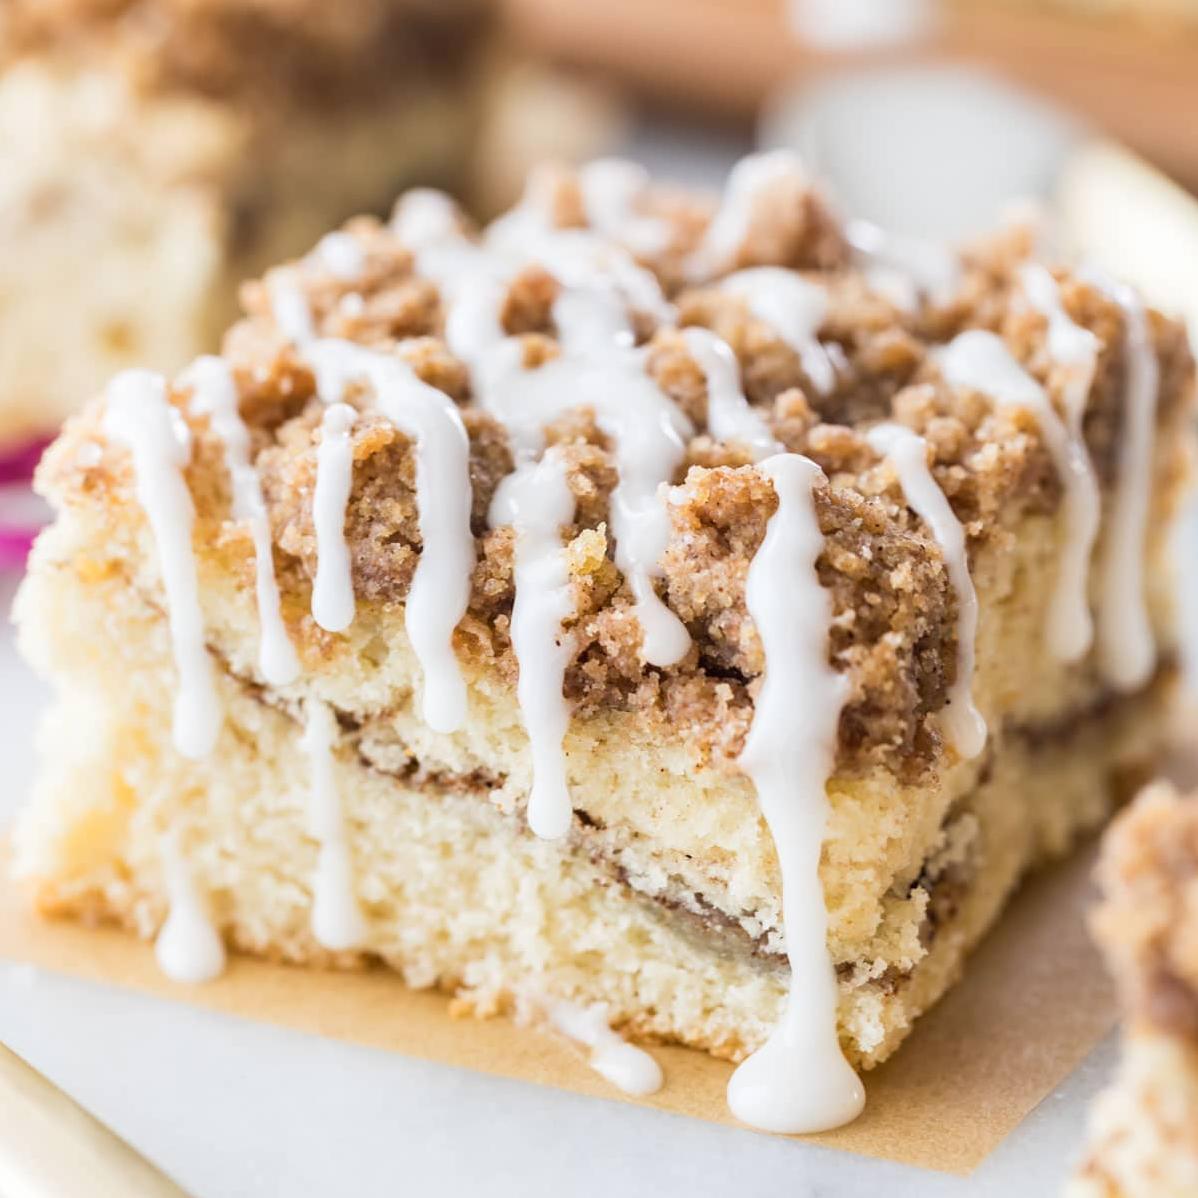  Get ready for your taste buds to dance with every bite of this mouth-watering coffee cake.